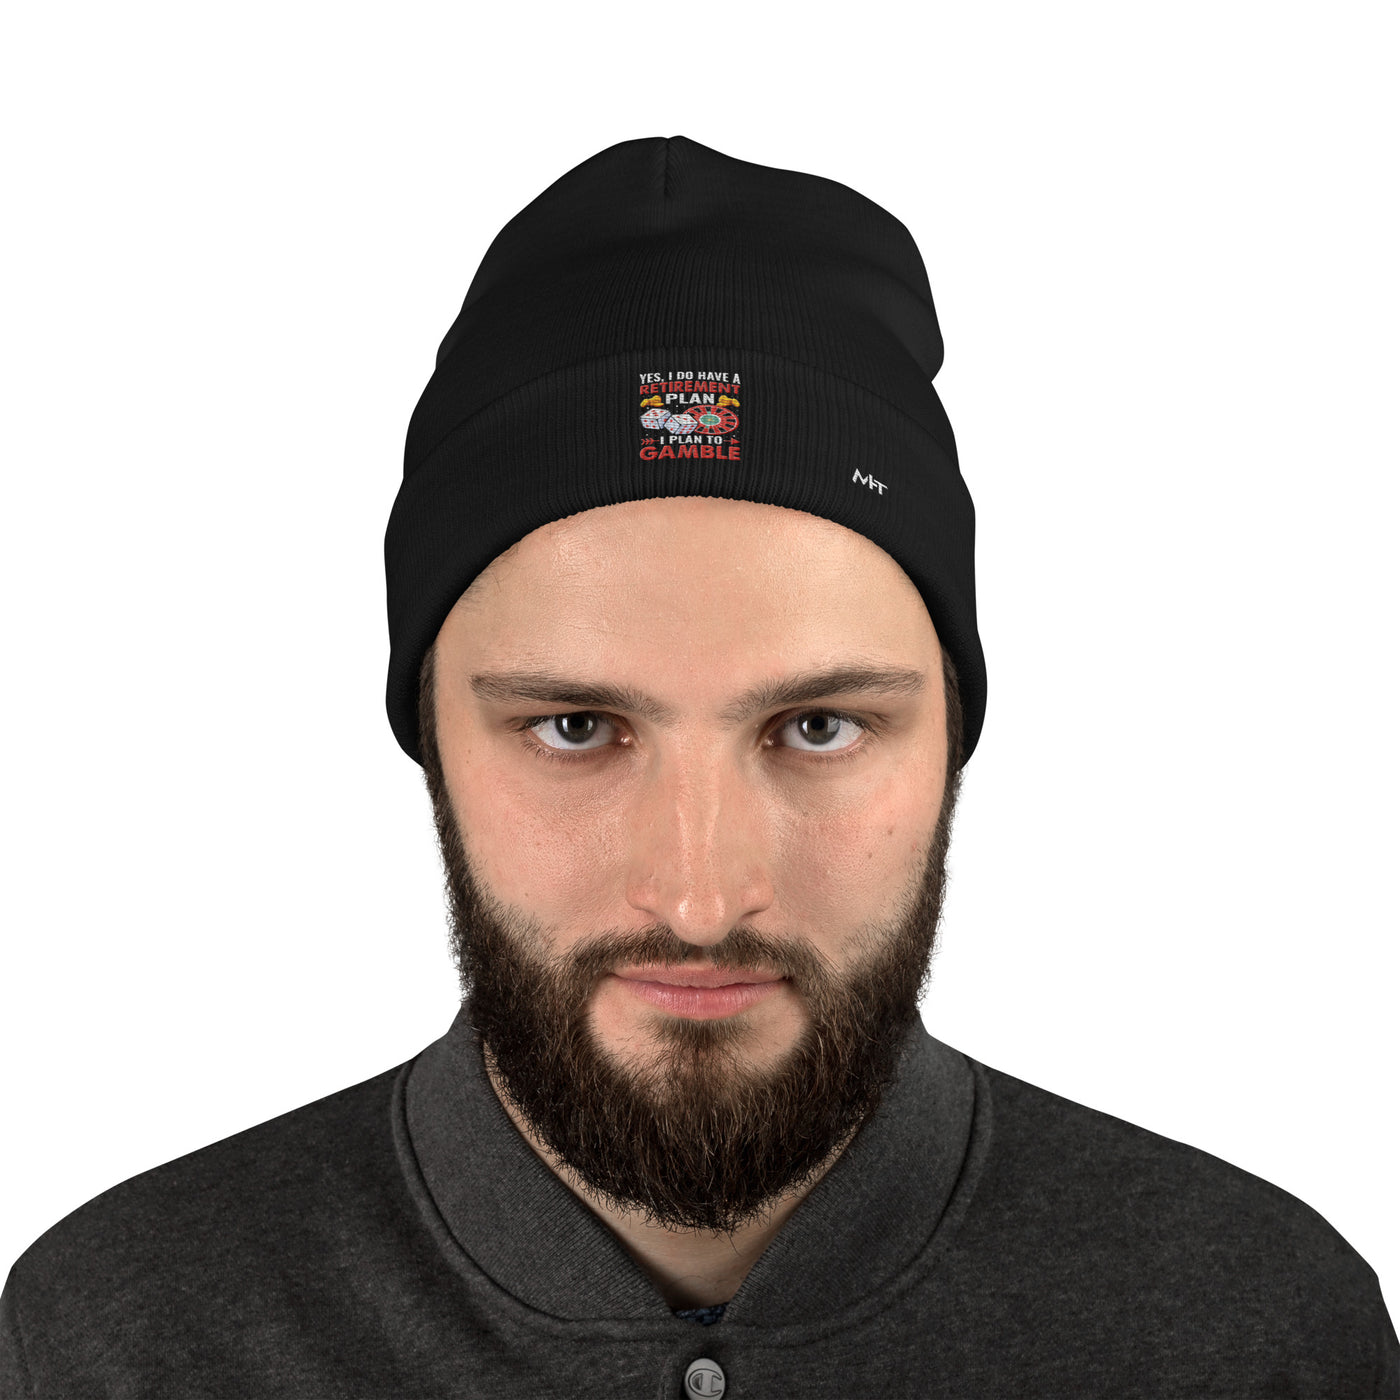 I Have a Retirement Plan; I Plan to Gamble - Embroidered Beanie